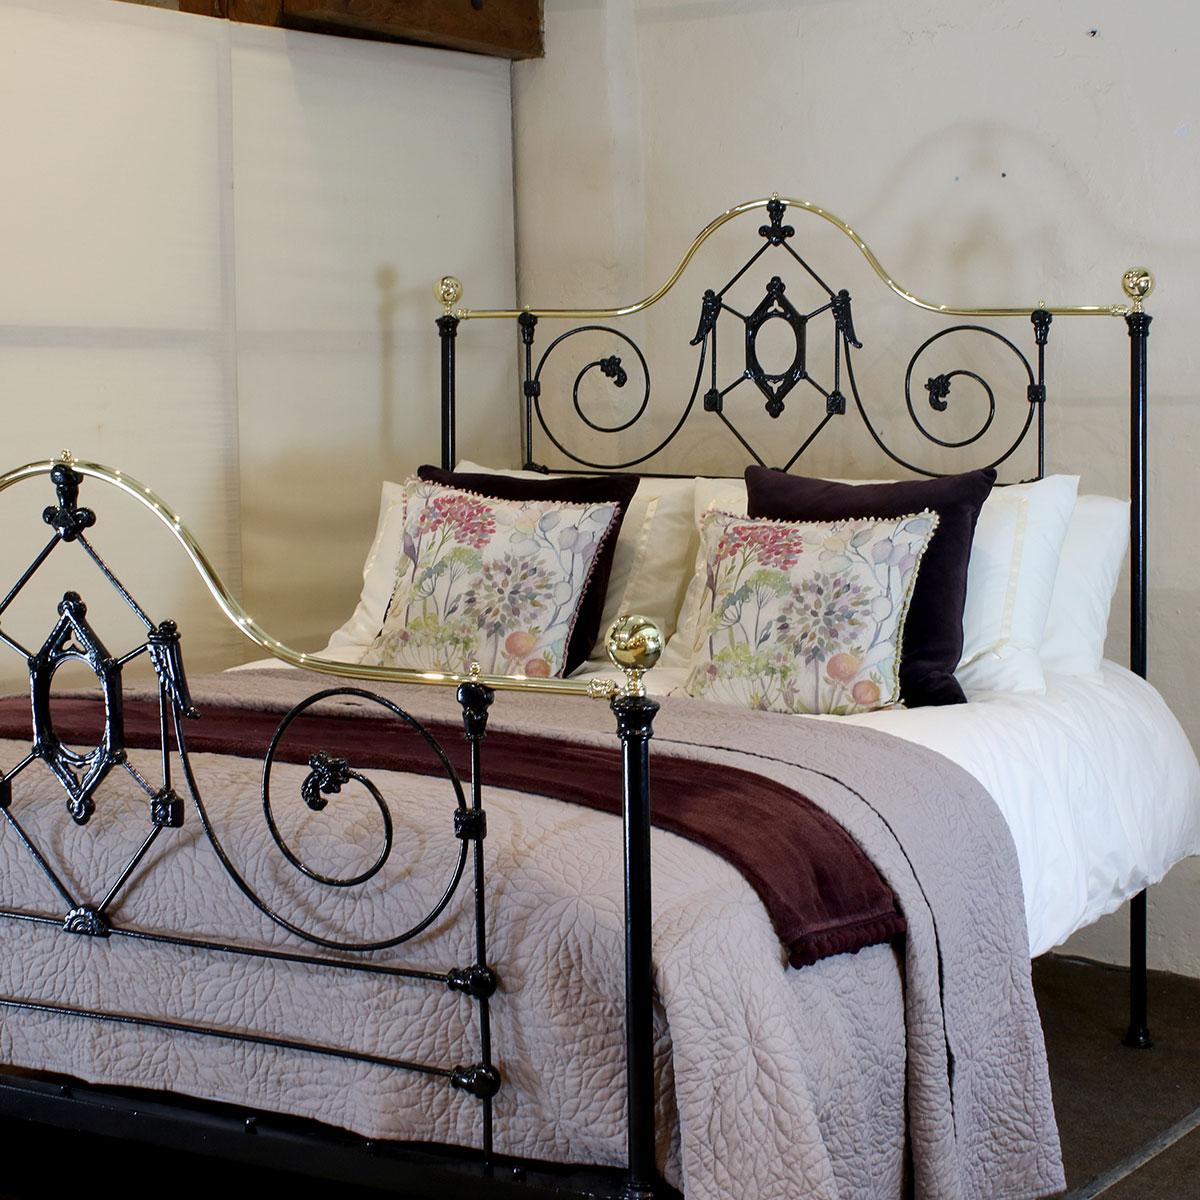 5'0 wide mid-Victorian cast iron bedstead in a Gothic style, finished in black with serpentine brass top rail and decorative castings, circa 1880.

This bed accepts a UK king size or US queen size (5ft, 60 inches or 150 cm wide) base and mattress